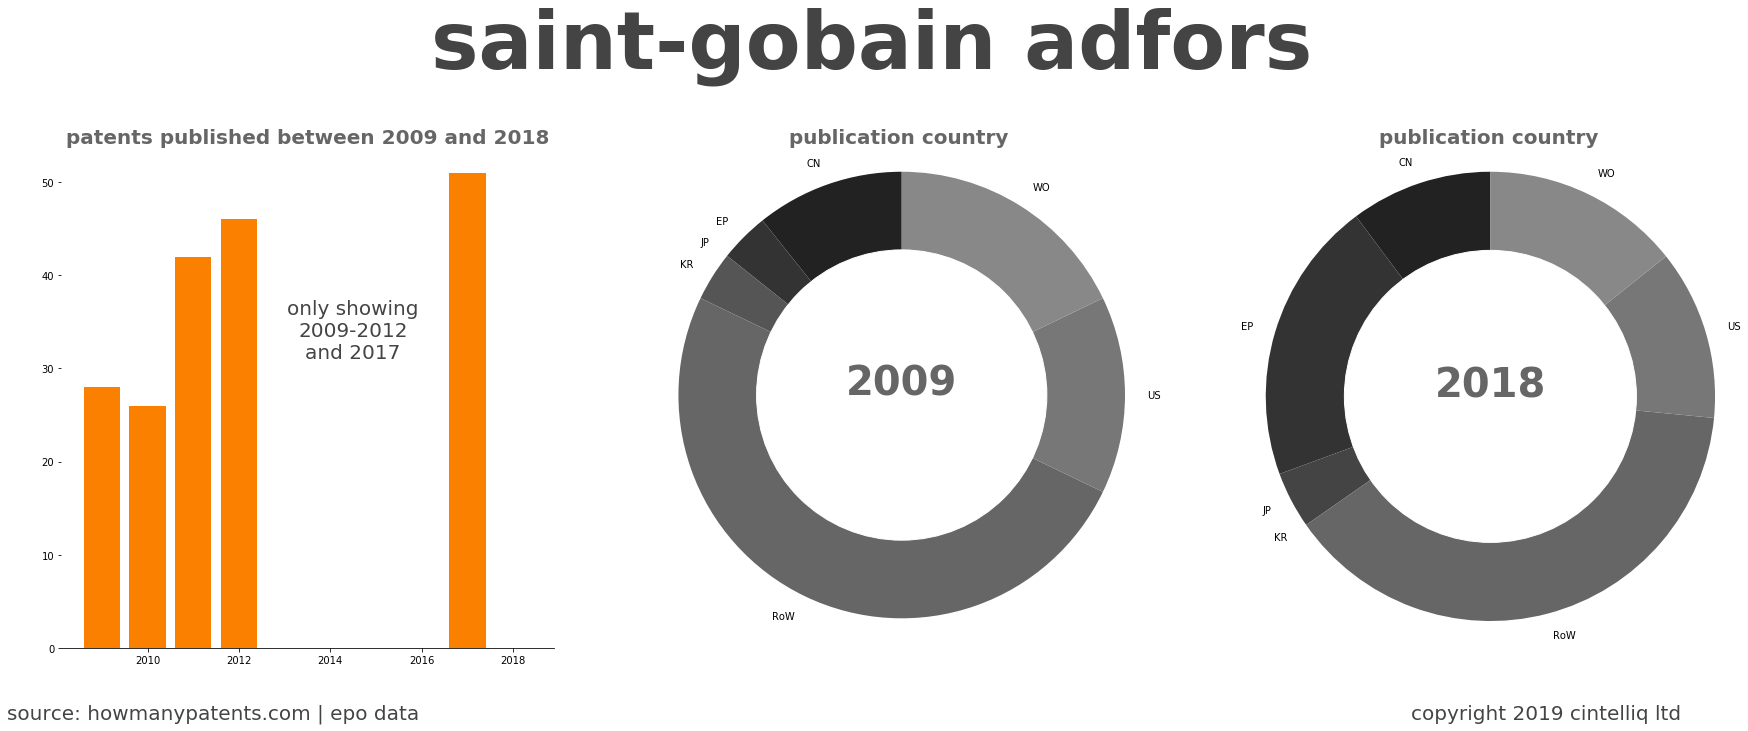 summary of patents for Saint-Gobain Adfors